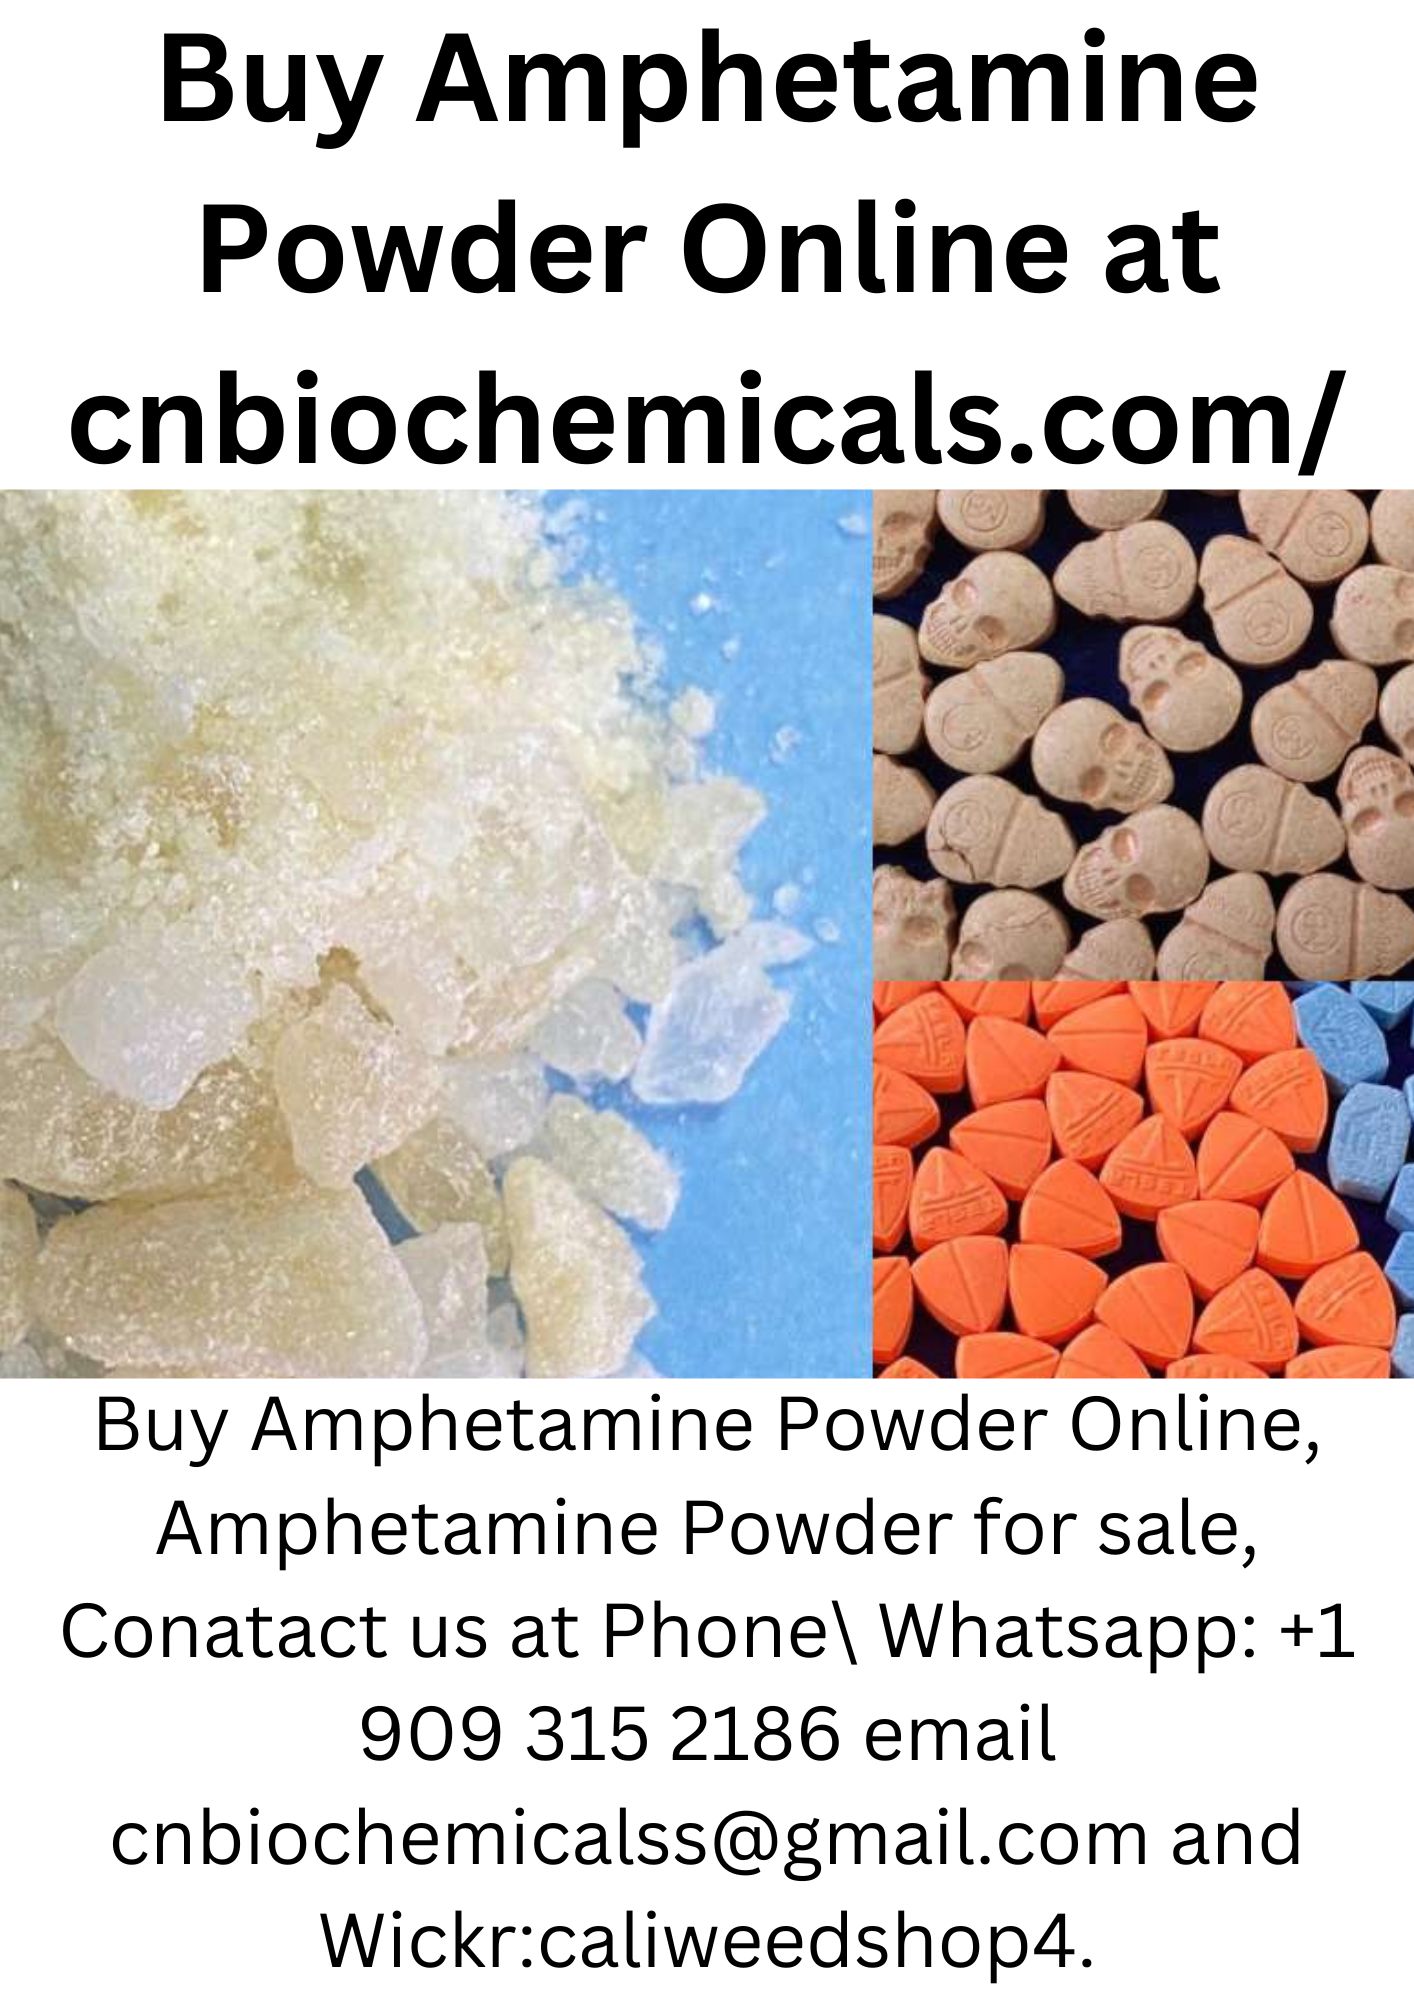 Buy Pure Crystals Meth Online cnbiochemicalscom or PhoneW - Connecticut - Hartford ID1547546